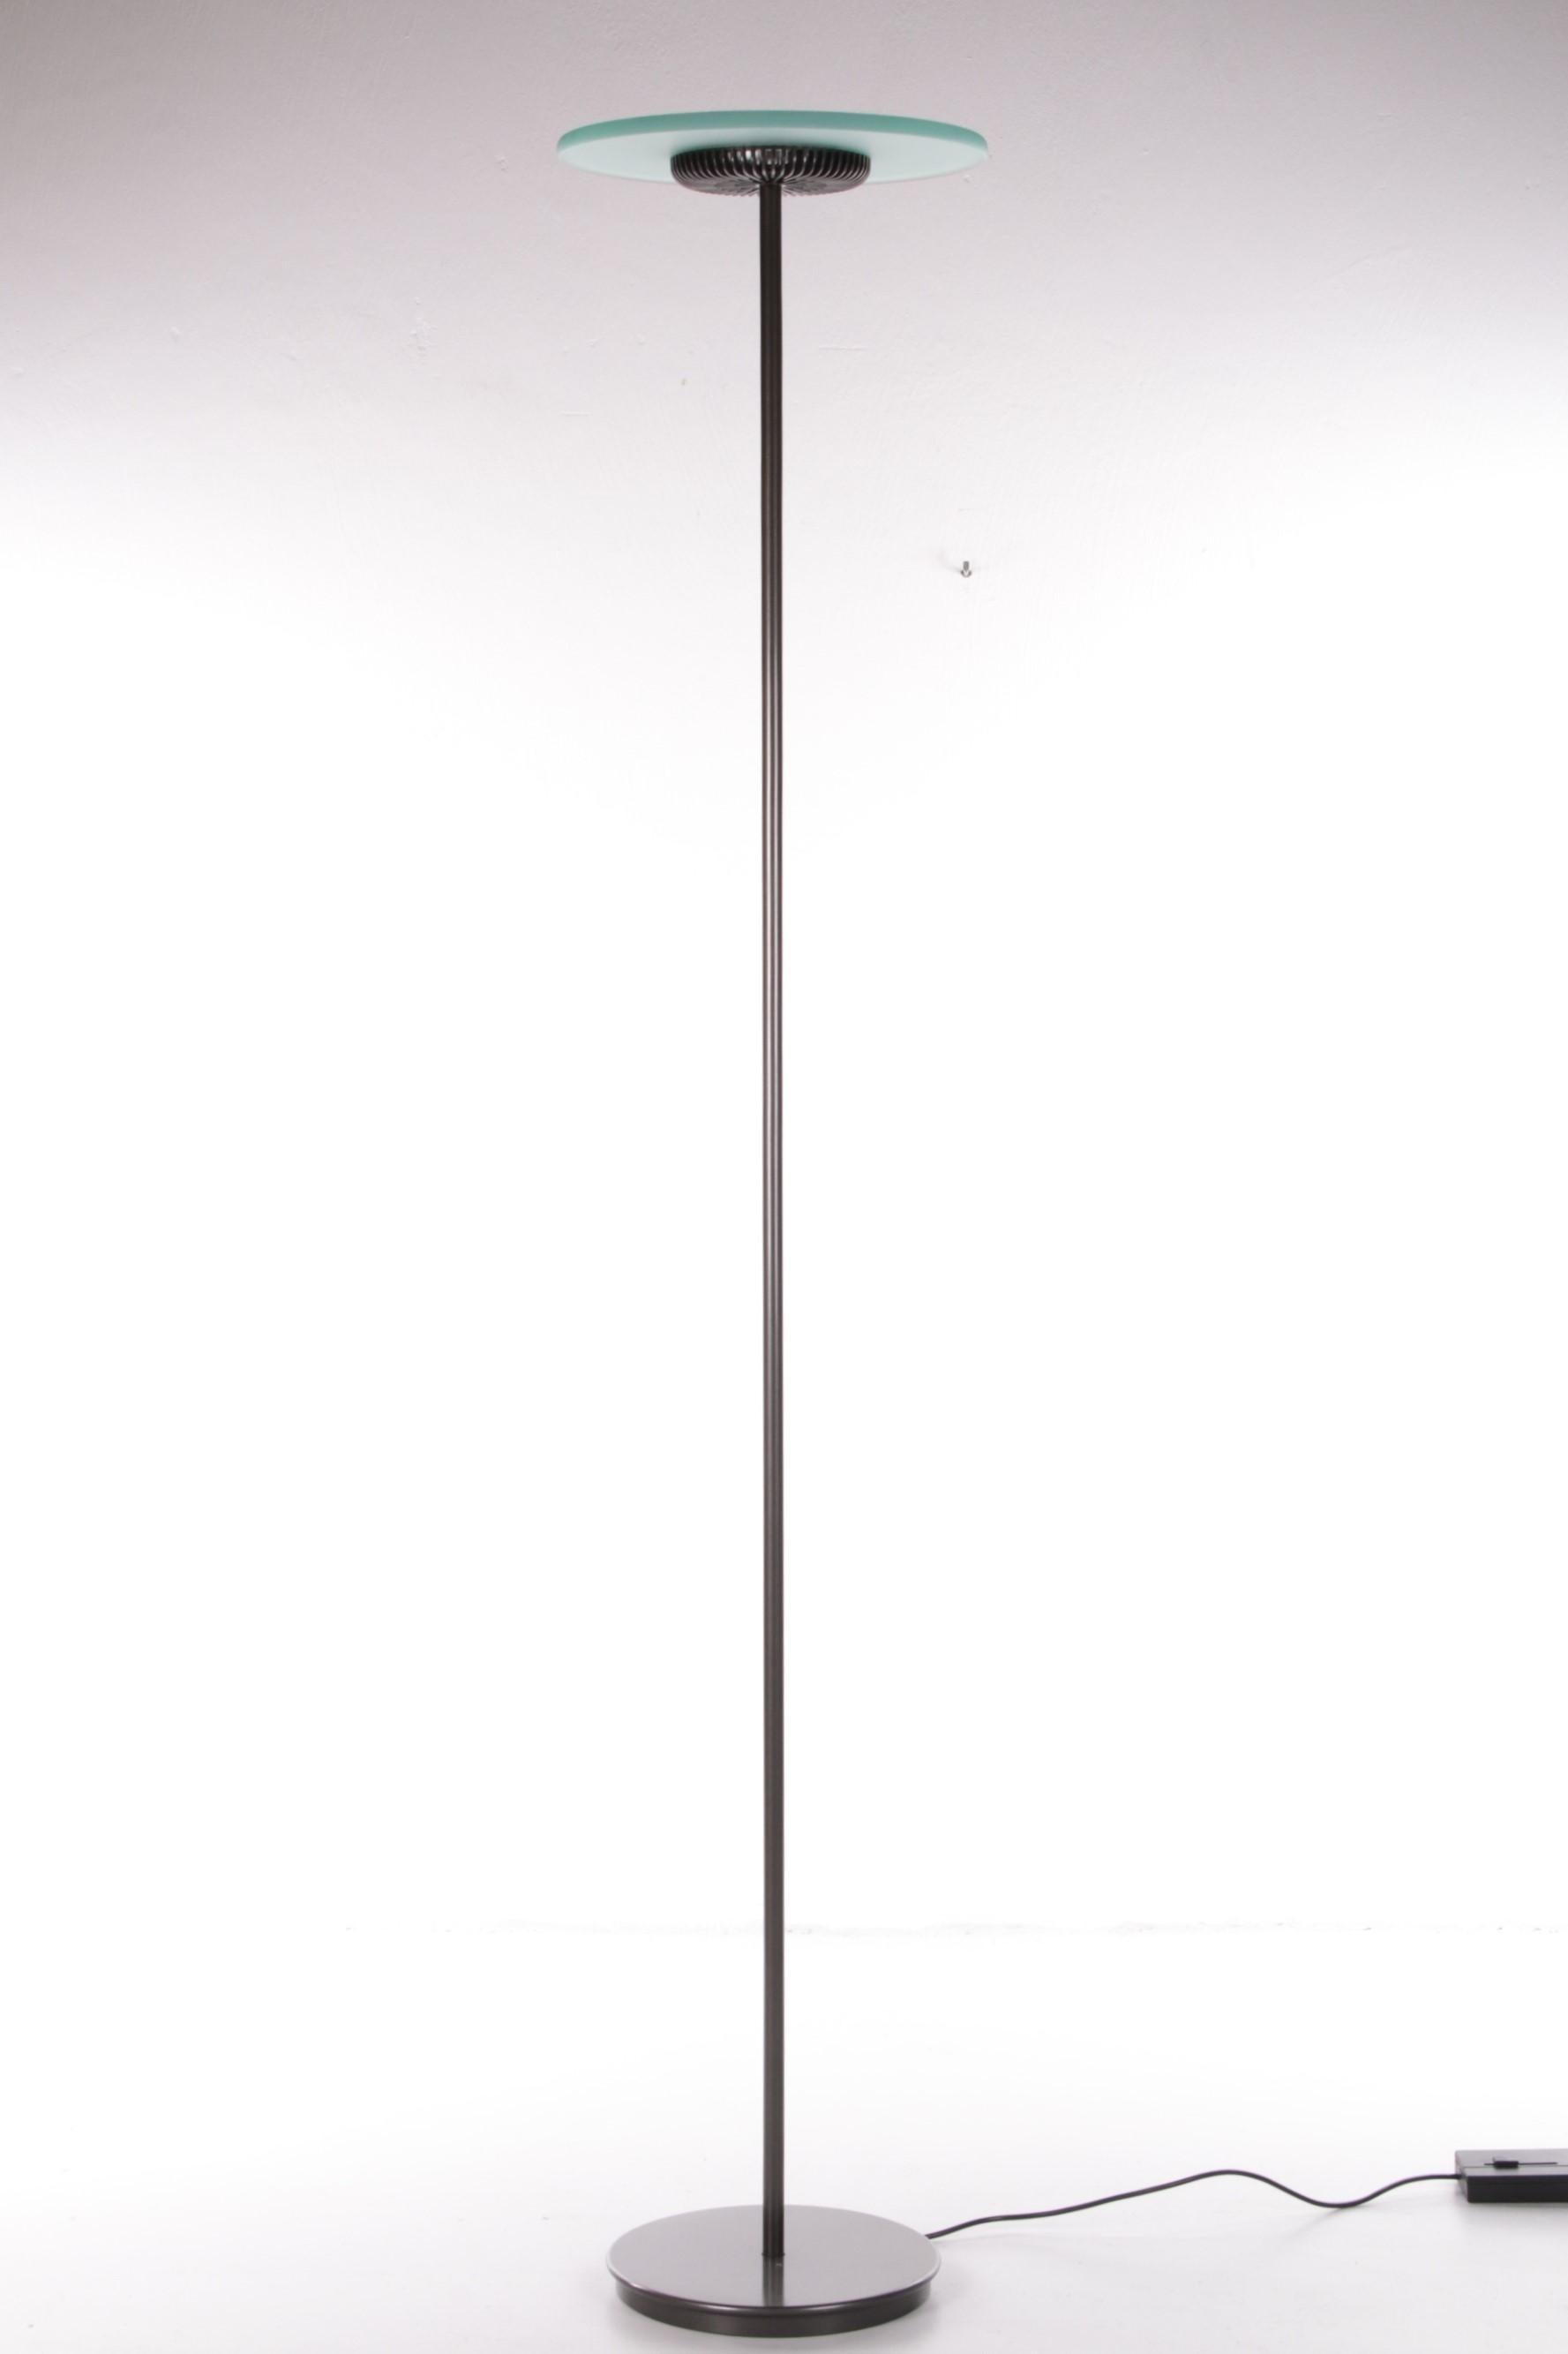 Aureola Halo floor lamp by Cini & Nils, Italy 1980


Aureola Floor lamp by Cini & Nils, made in Italy.

Beautiful thick glass plate with cut edges and acid-etched surface that glows? illuminates when the lamp is on.

Dark anthracite gray